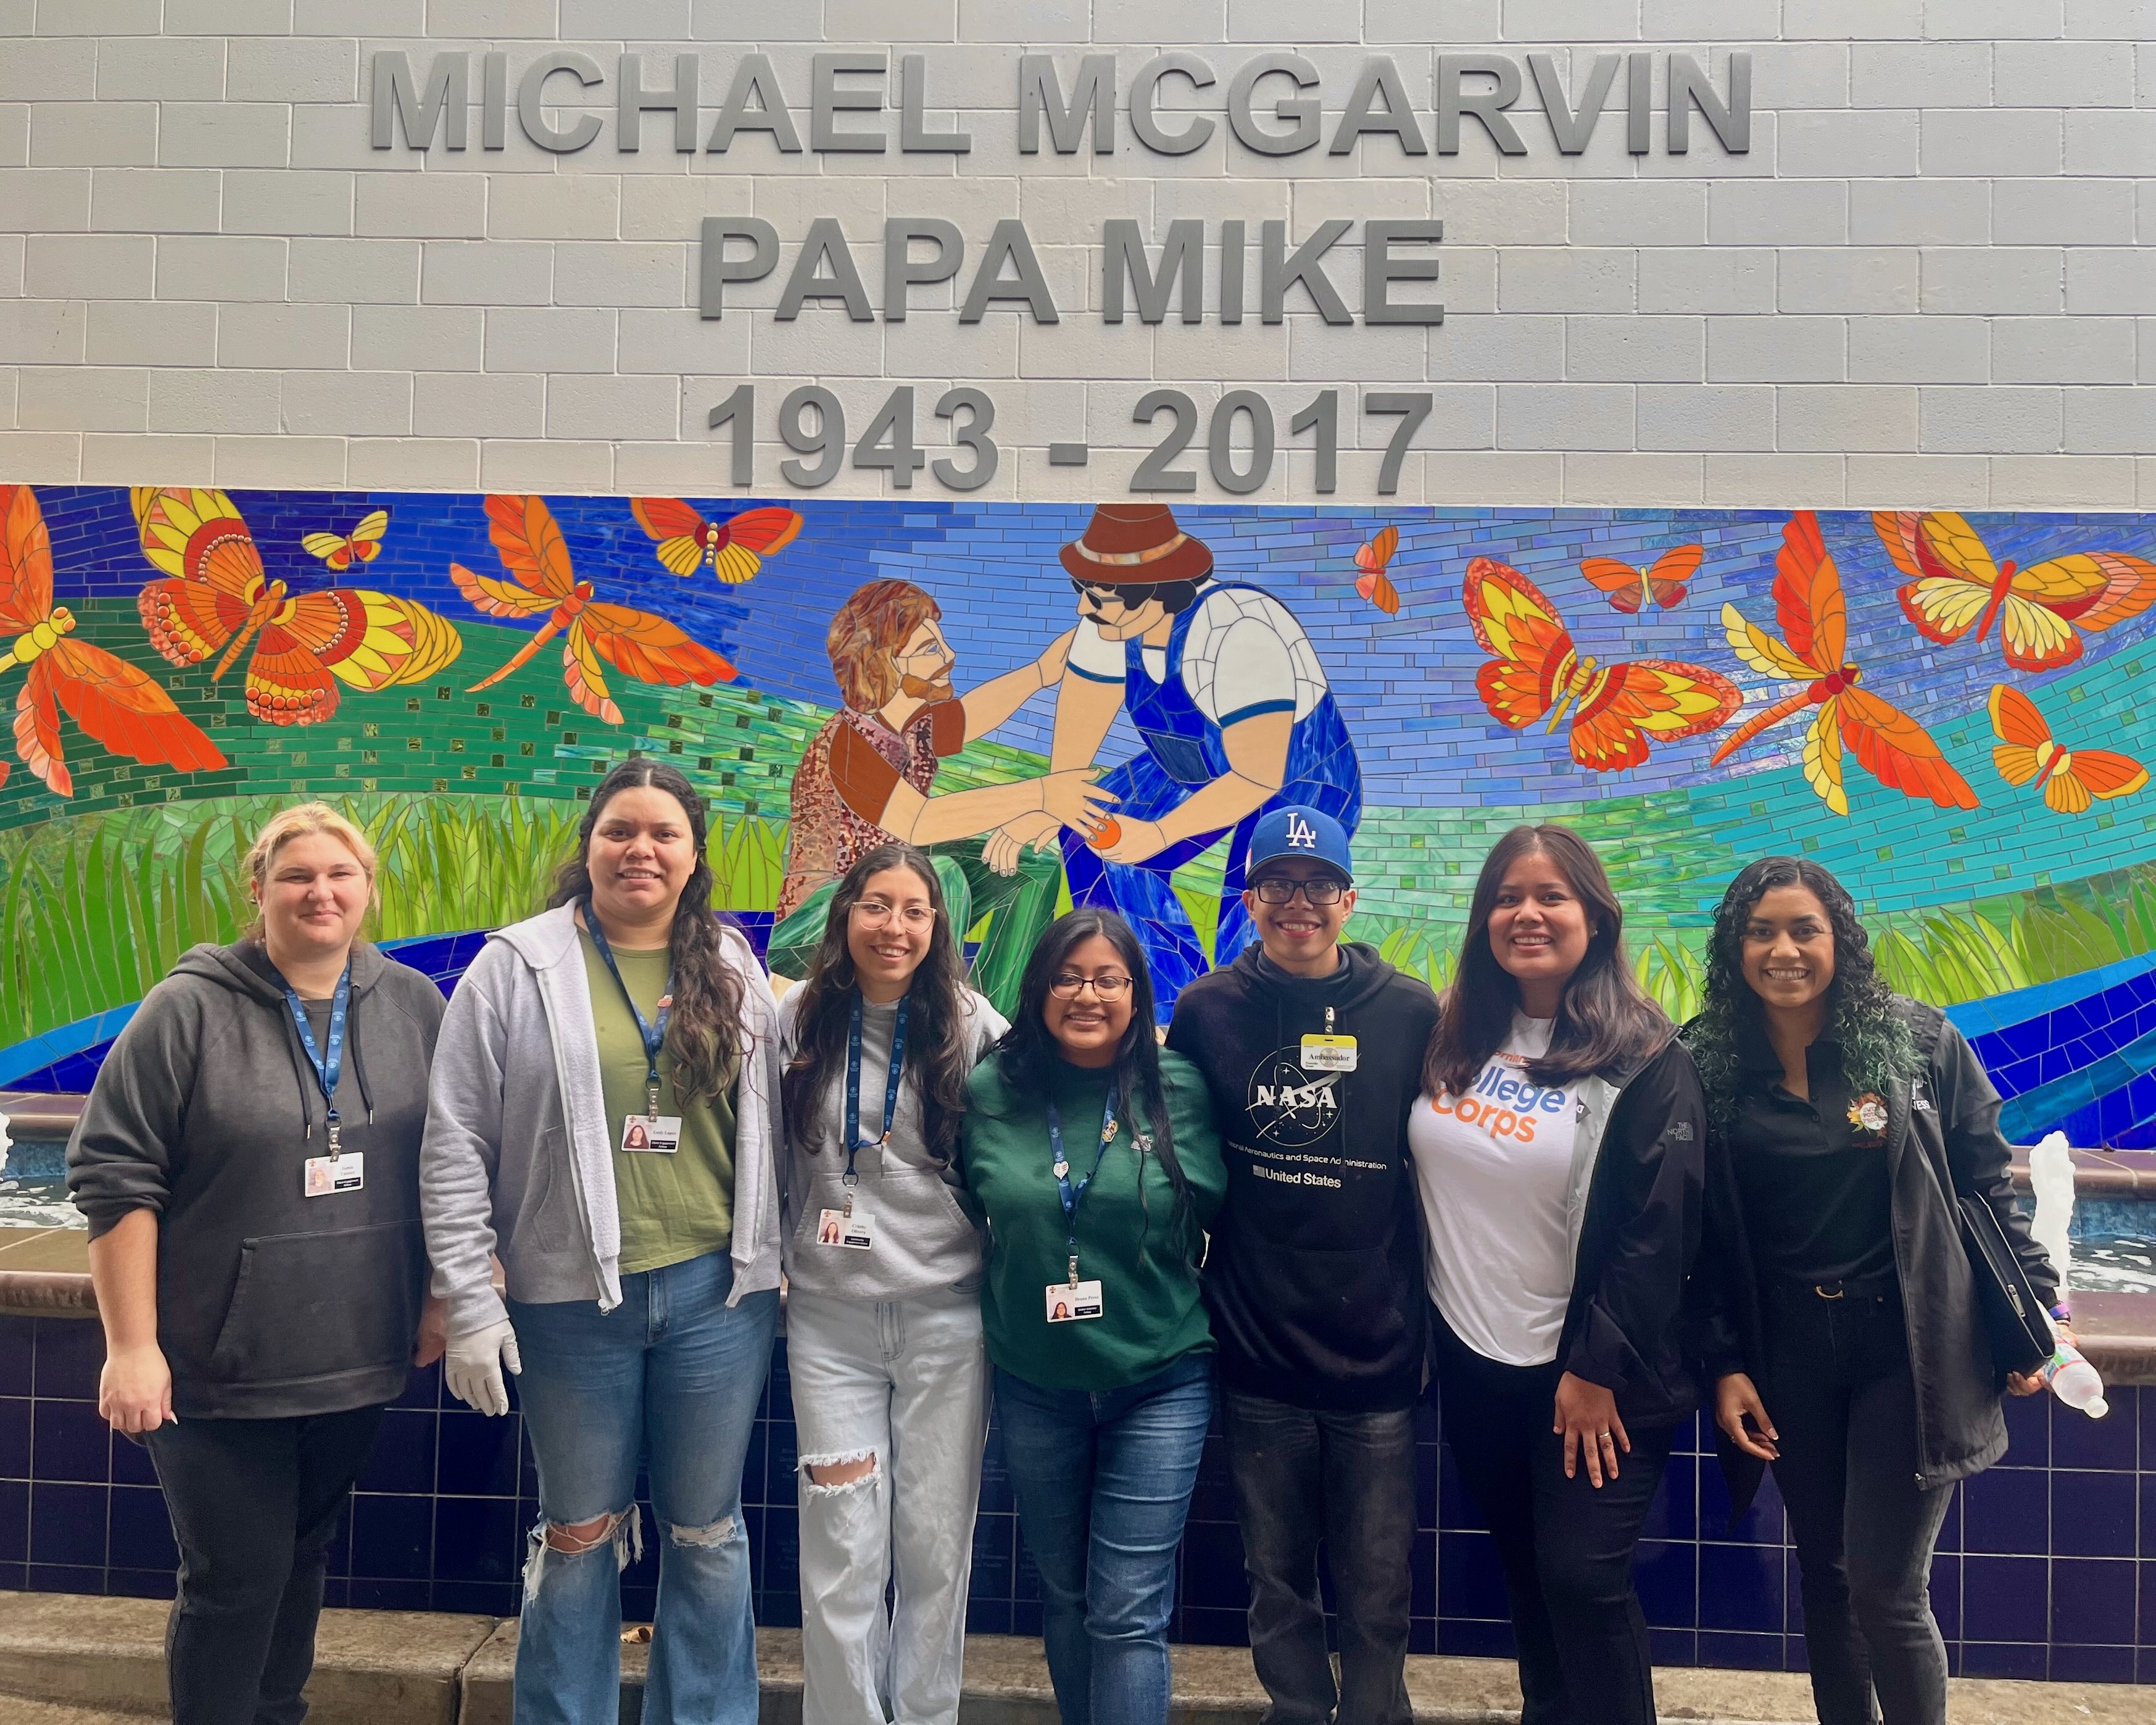 Students take a photo in front of a mural of Michael "Papa Mike" McGarvin at the Poverello House.